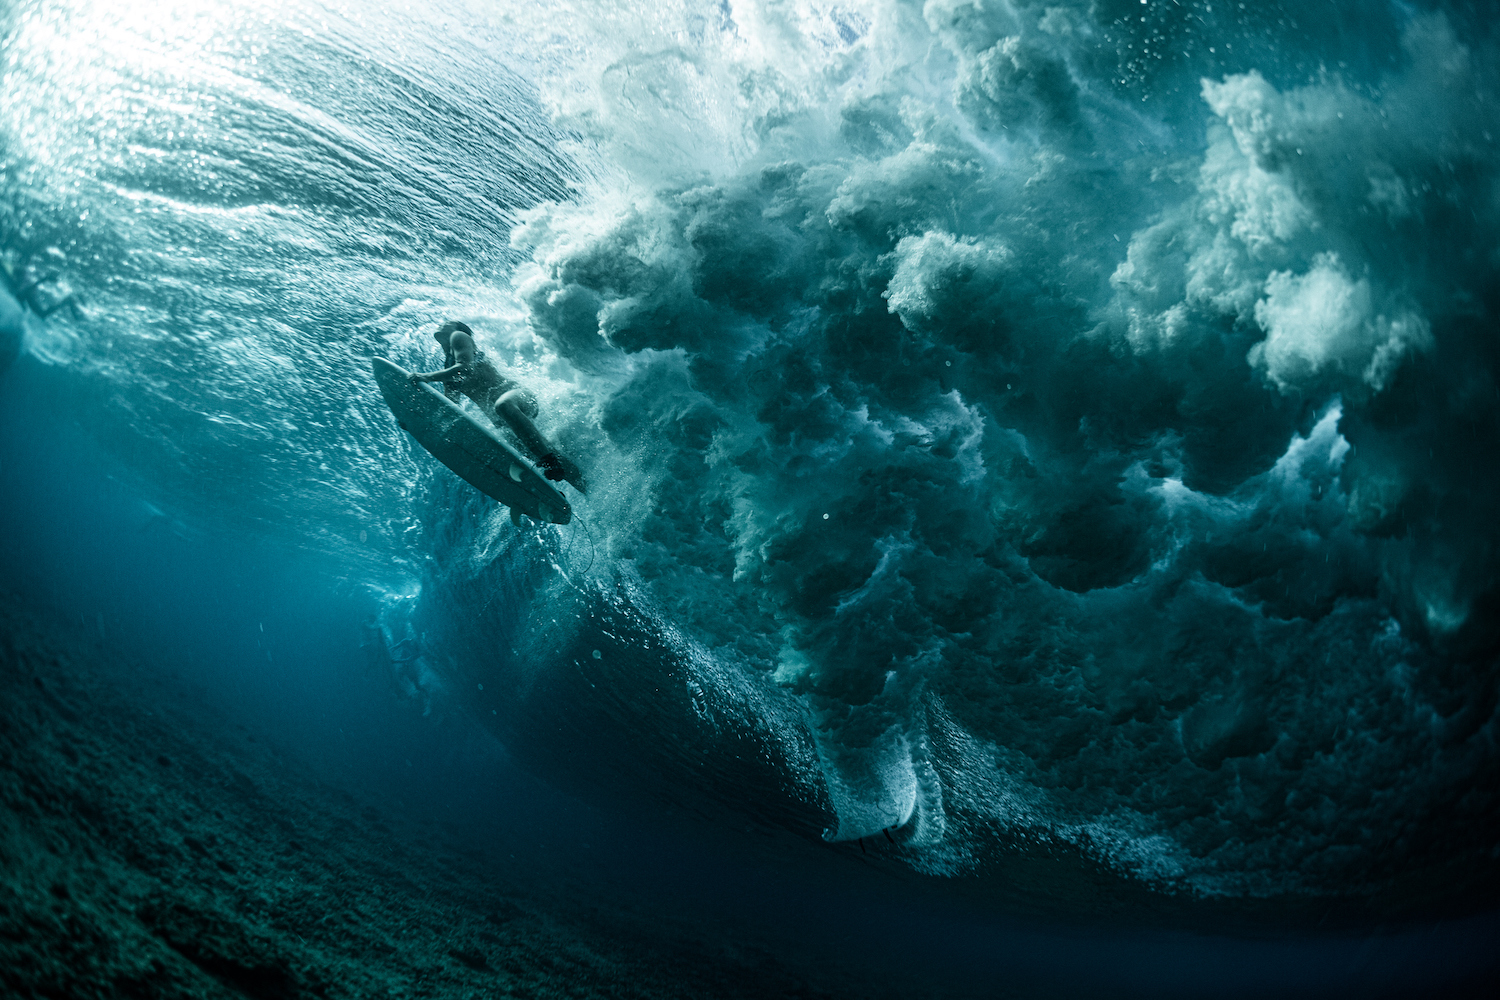 surf photographers raise ocean awareness in 'stories for the sea' book